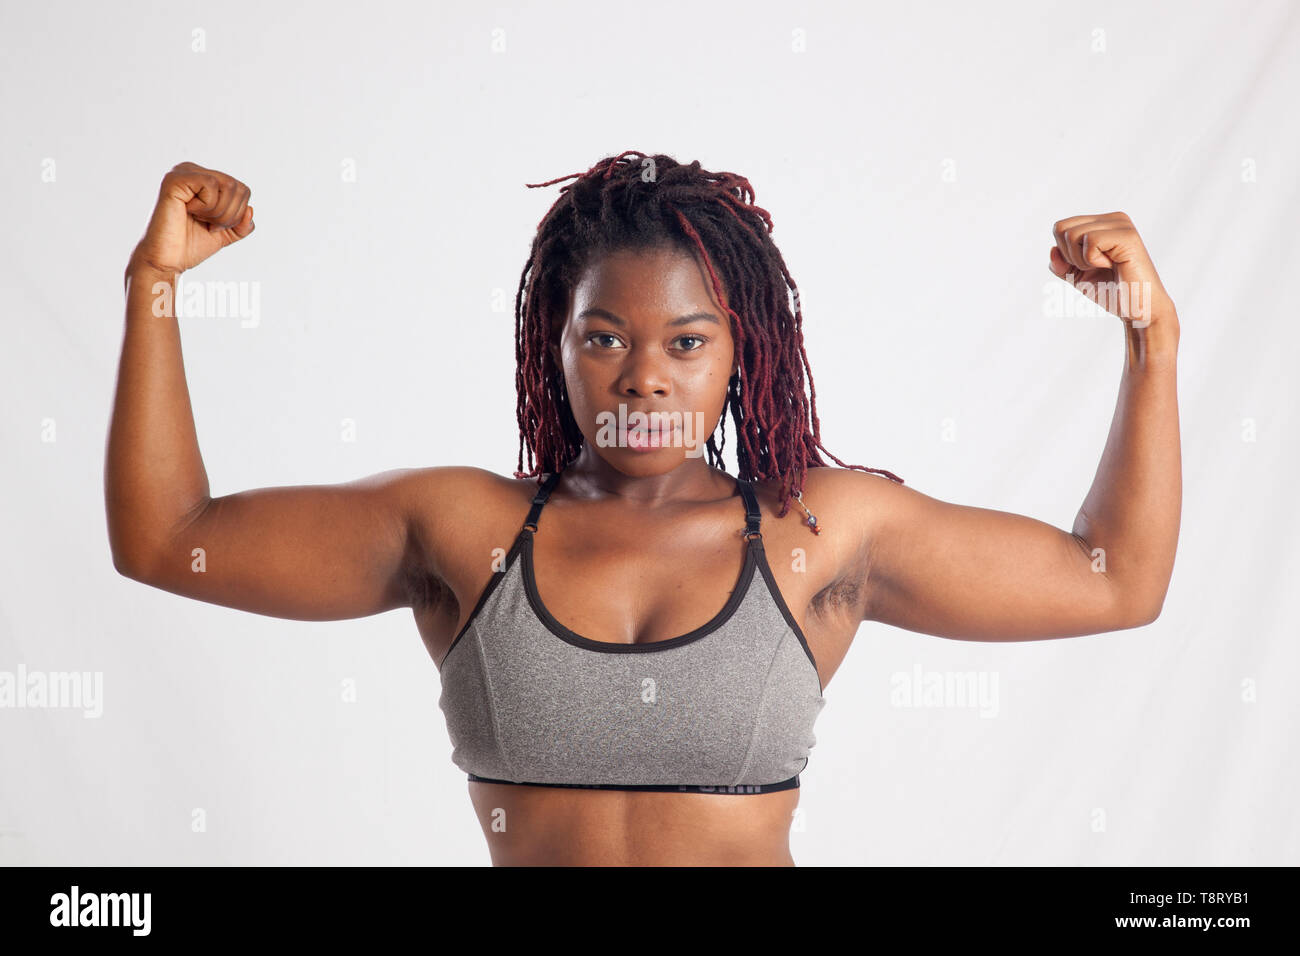 Pretty Black woman flexing her muscles Stock Photo - Alamy